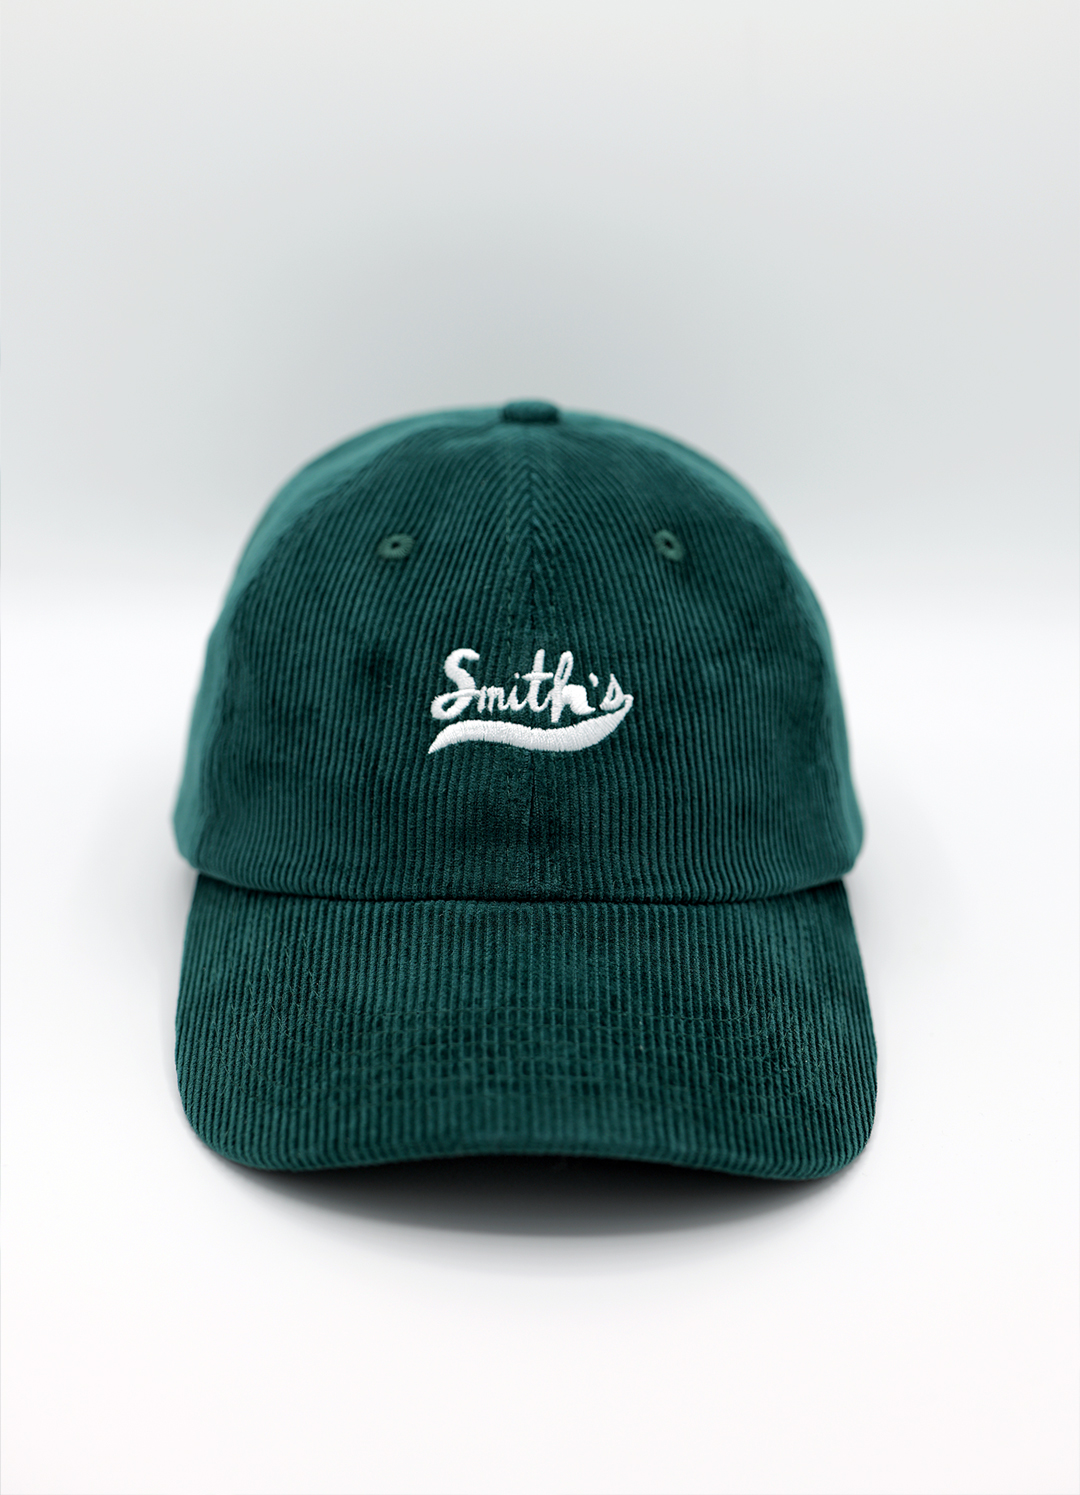 Hats and Caps Archives SMITH® CHRIS URBANE - MUSE